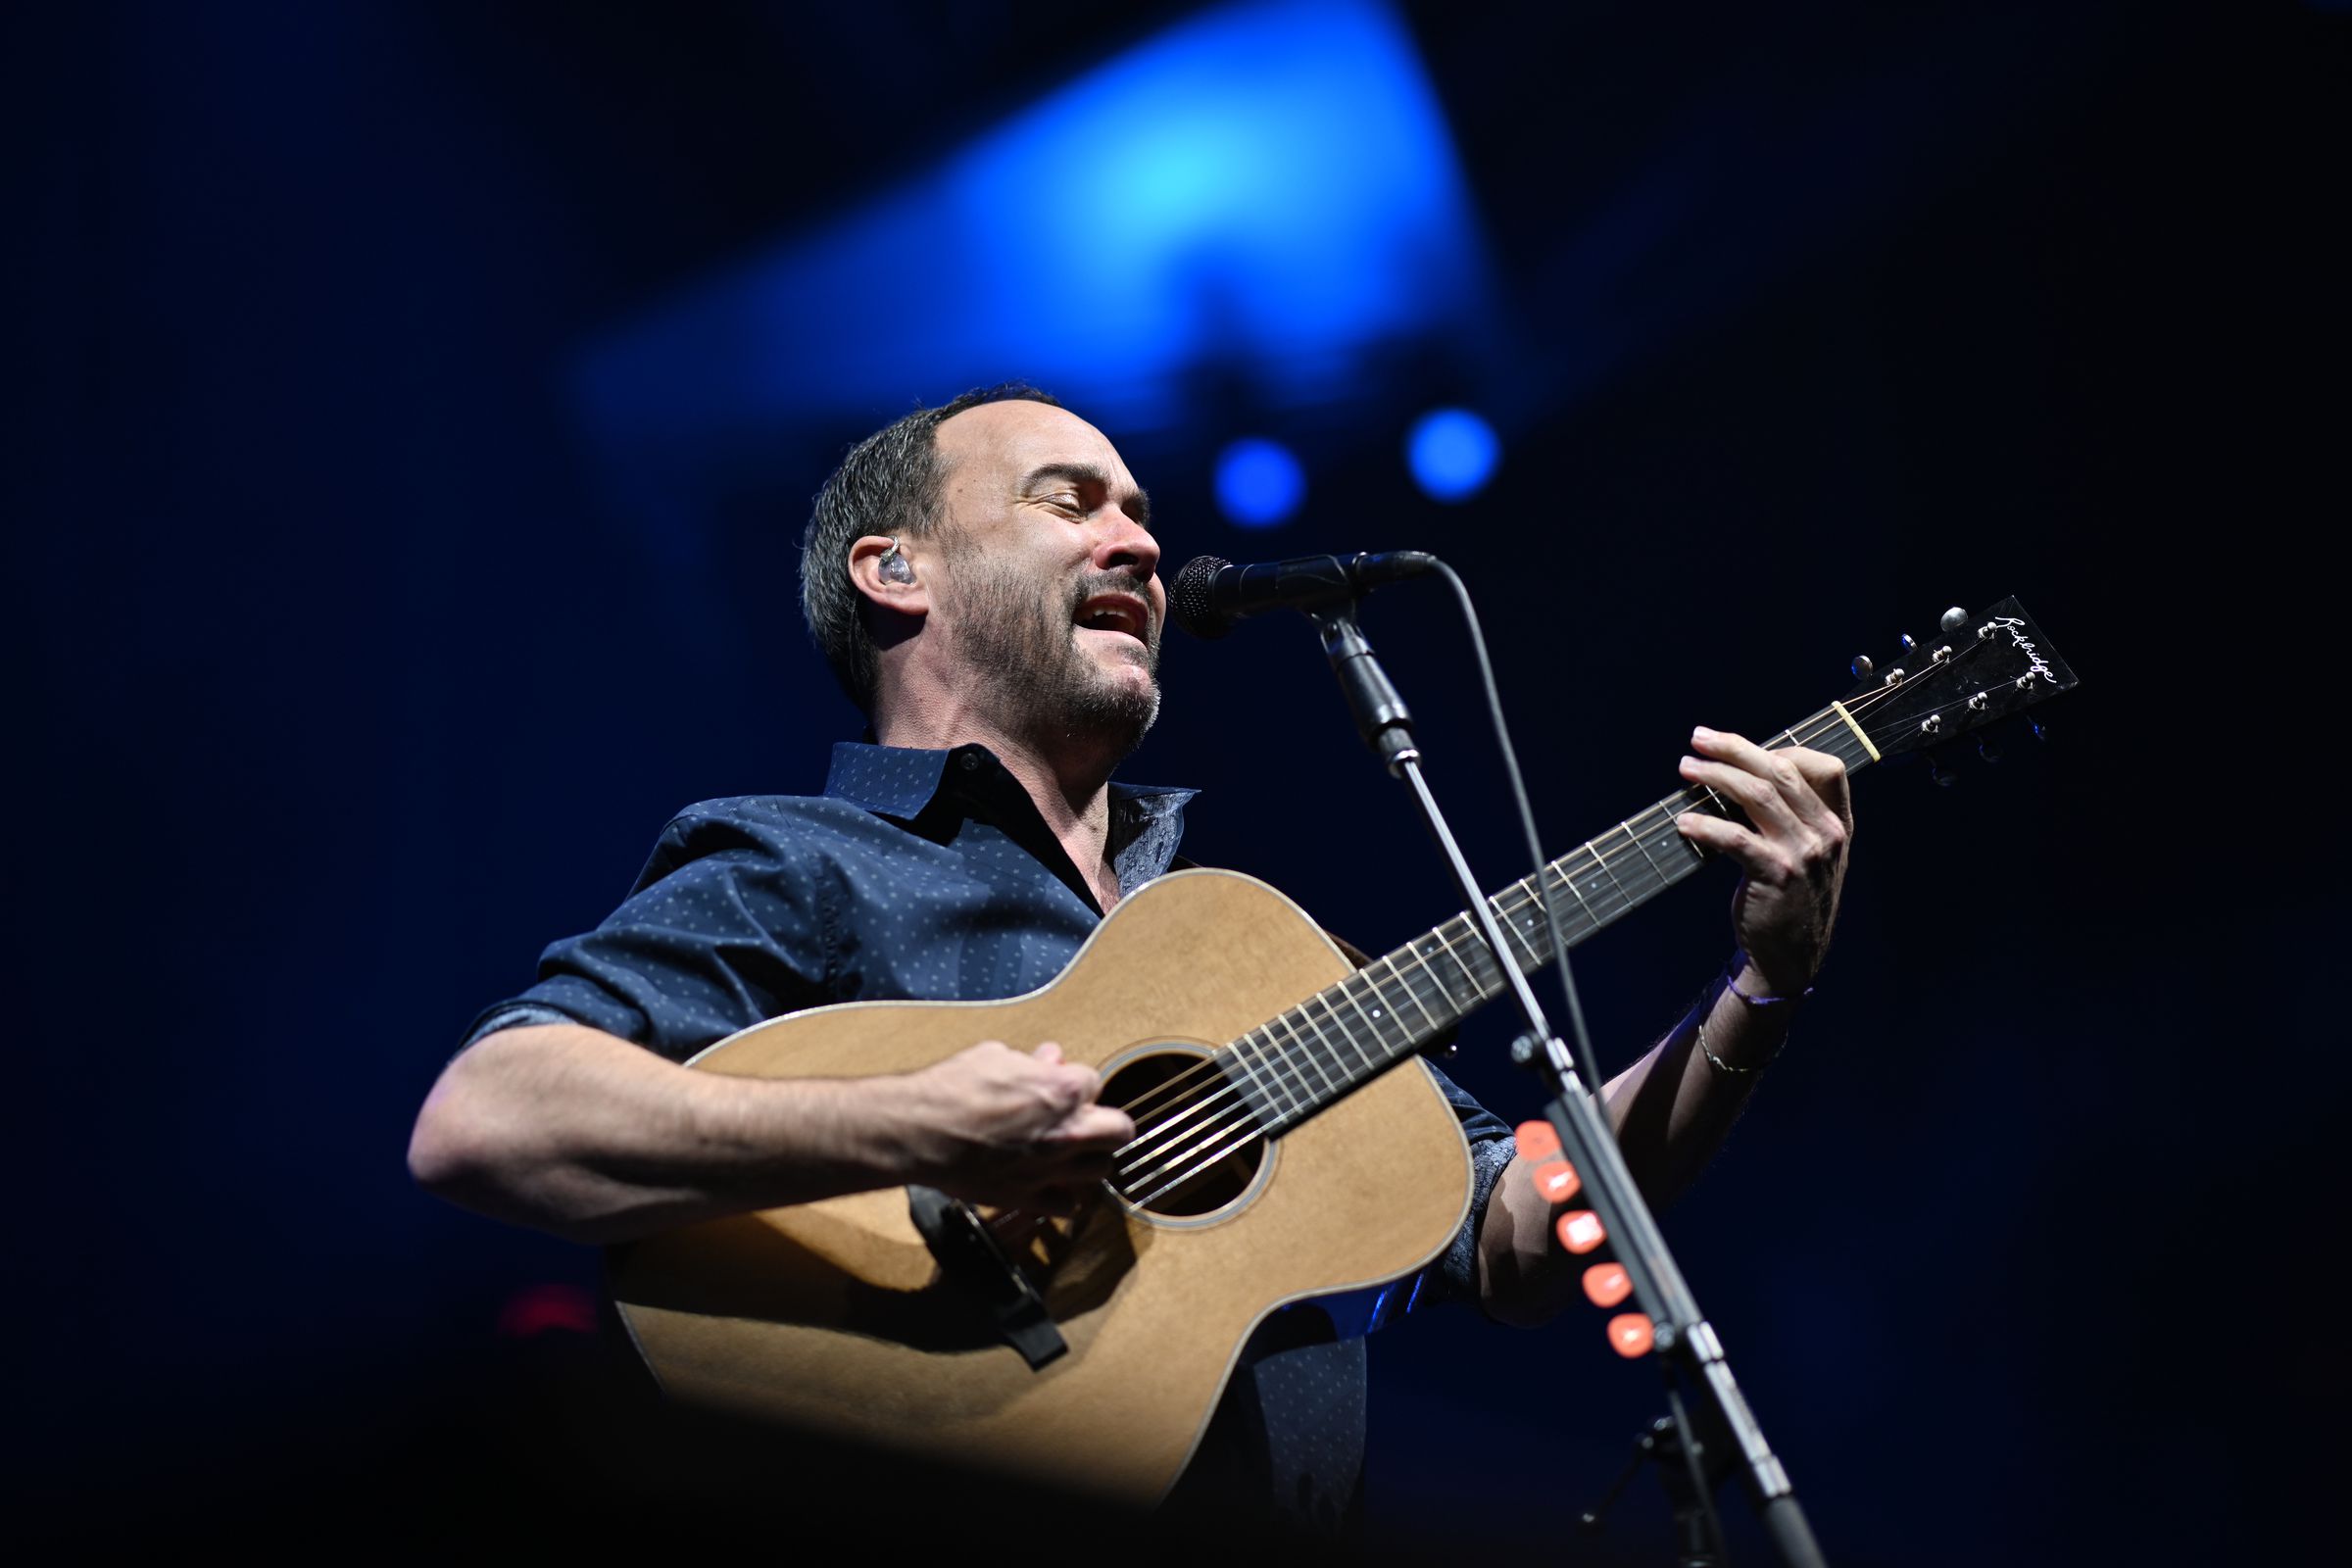 Dave Matthews Band at Times Union Center in Albany, NY on December 5th, 2018. Out-of-camera JPEG. Shot on the Nikon Z7 with 105mm f/1.4 lens F-mount lens and FTZ adapter. 1/500 sec at f/1.8. ISO 200. Click or tap here for full-res image.